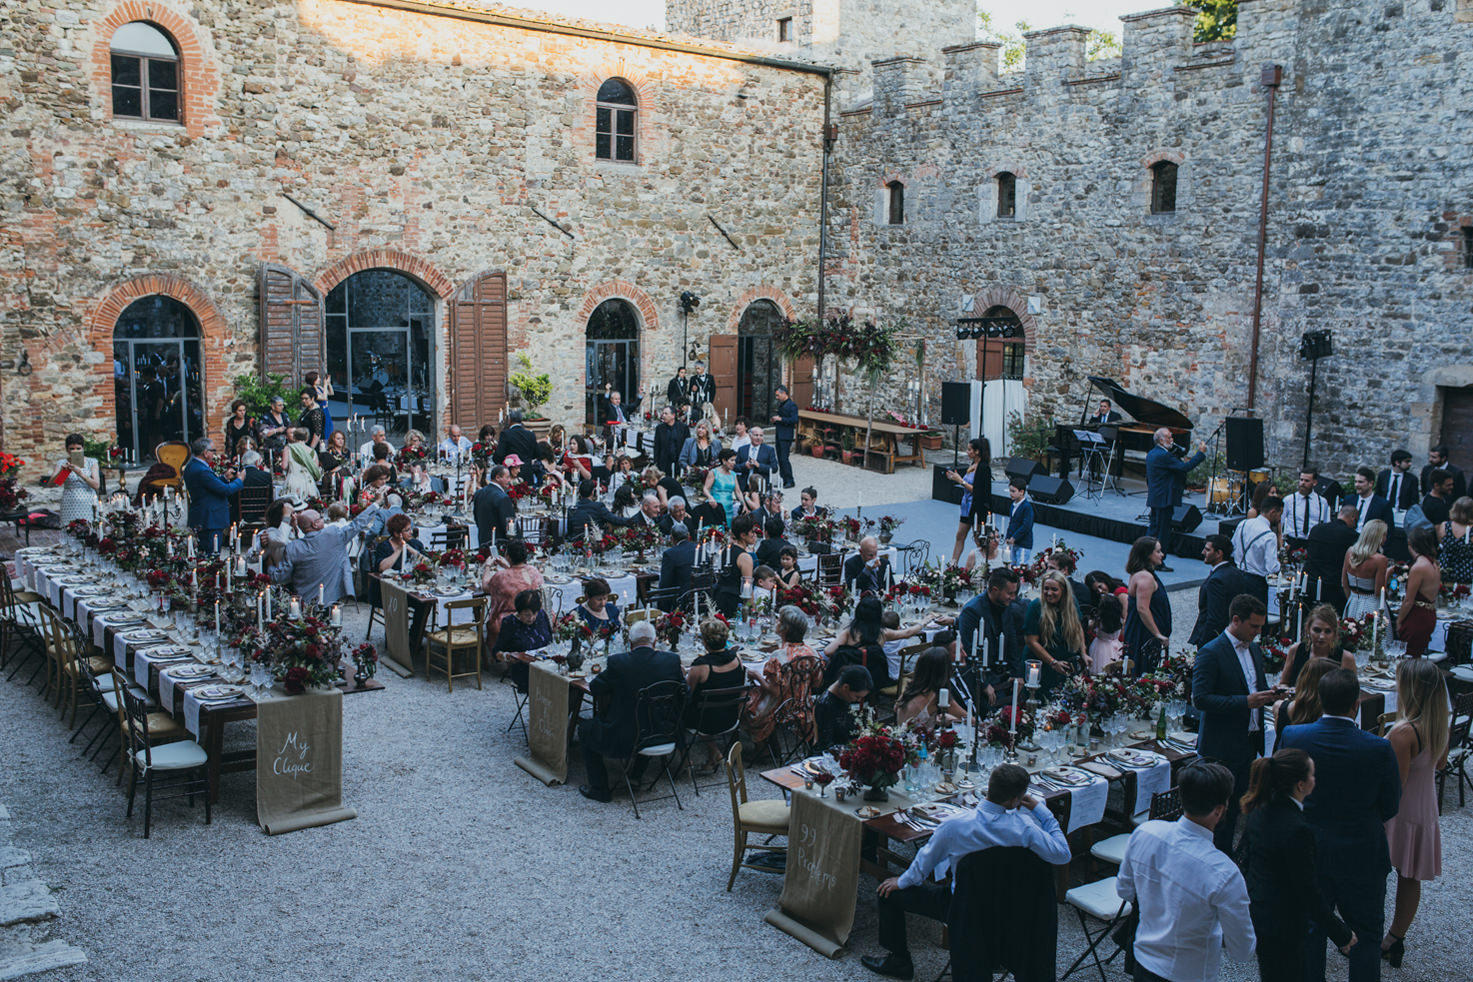 Wedding reception in the castle courtyard